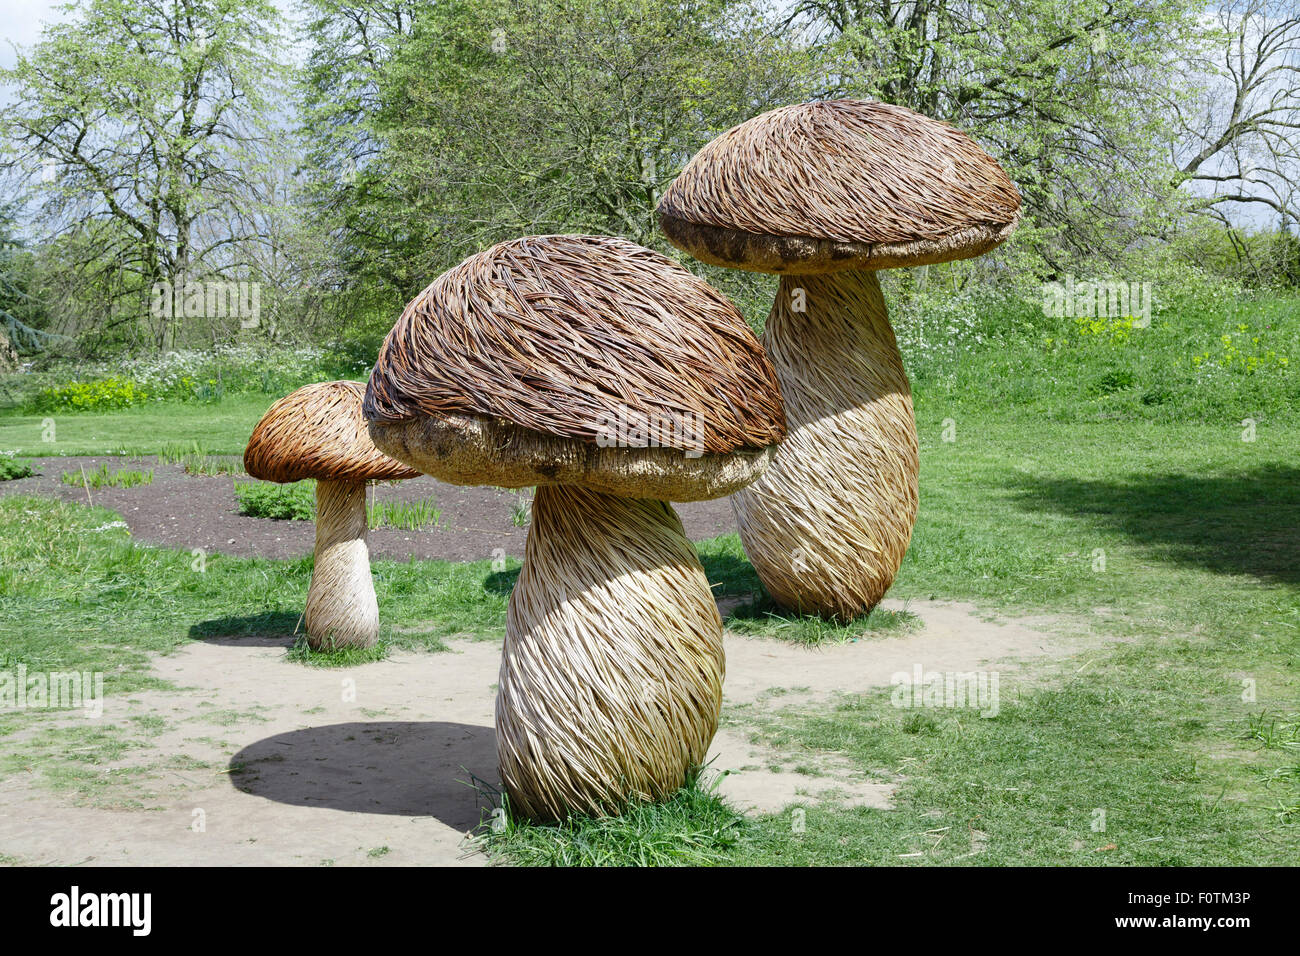 Giant mushrooms made from willow by artist Tom Hare. Kew Gardens, London, UK Stock Photo